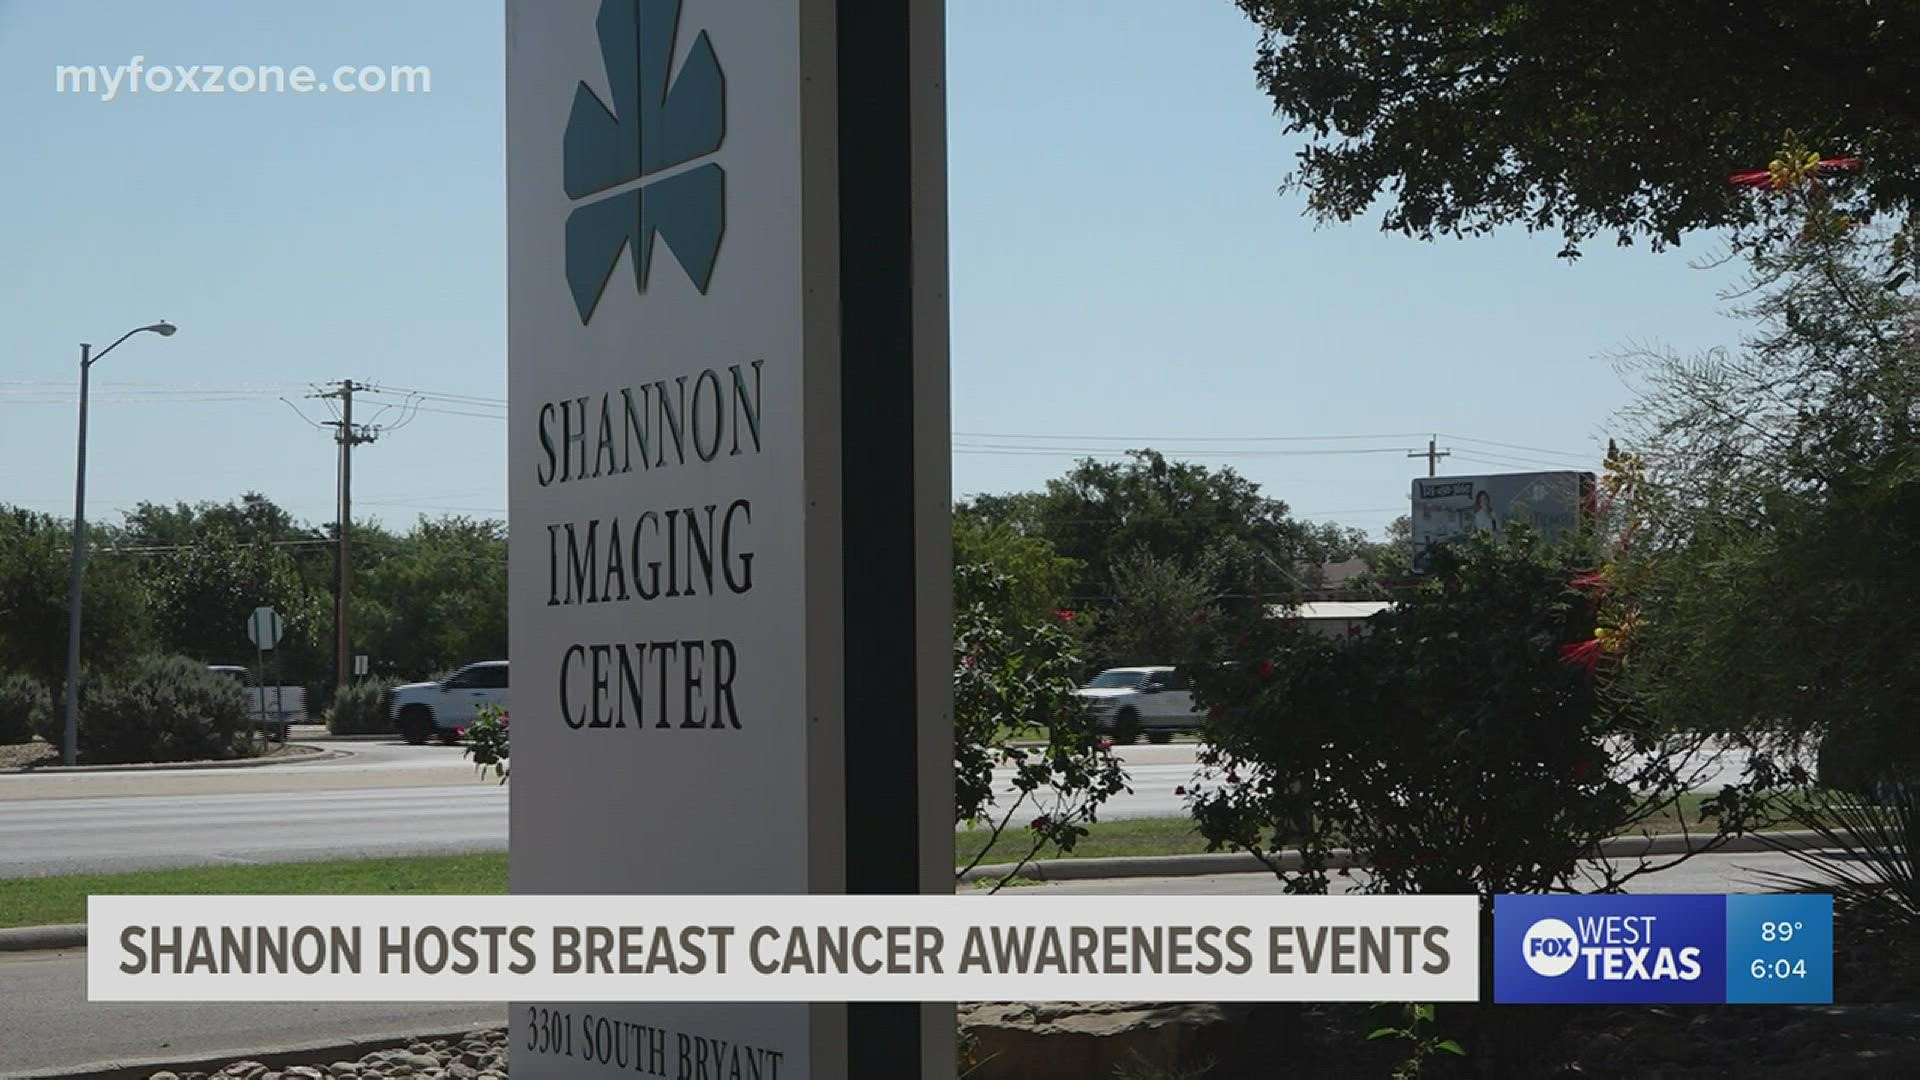 To honor breast cancer survivors and raise awareness for early detection, Shannon will have several events through the month of October.